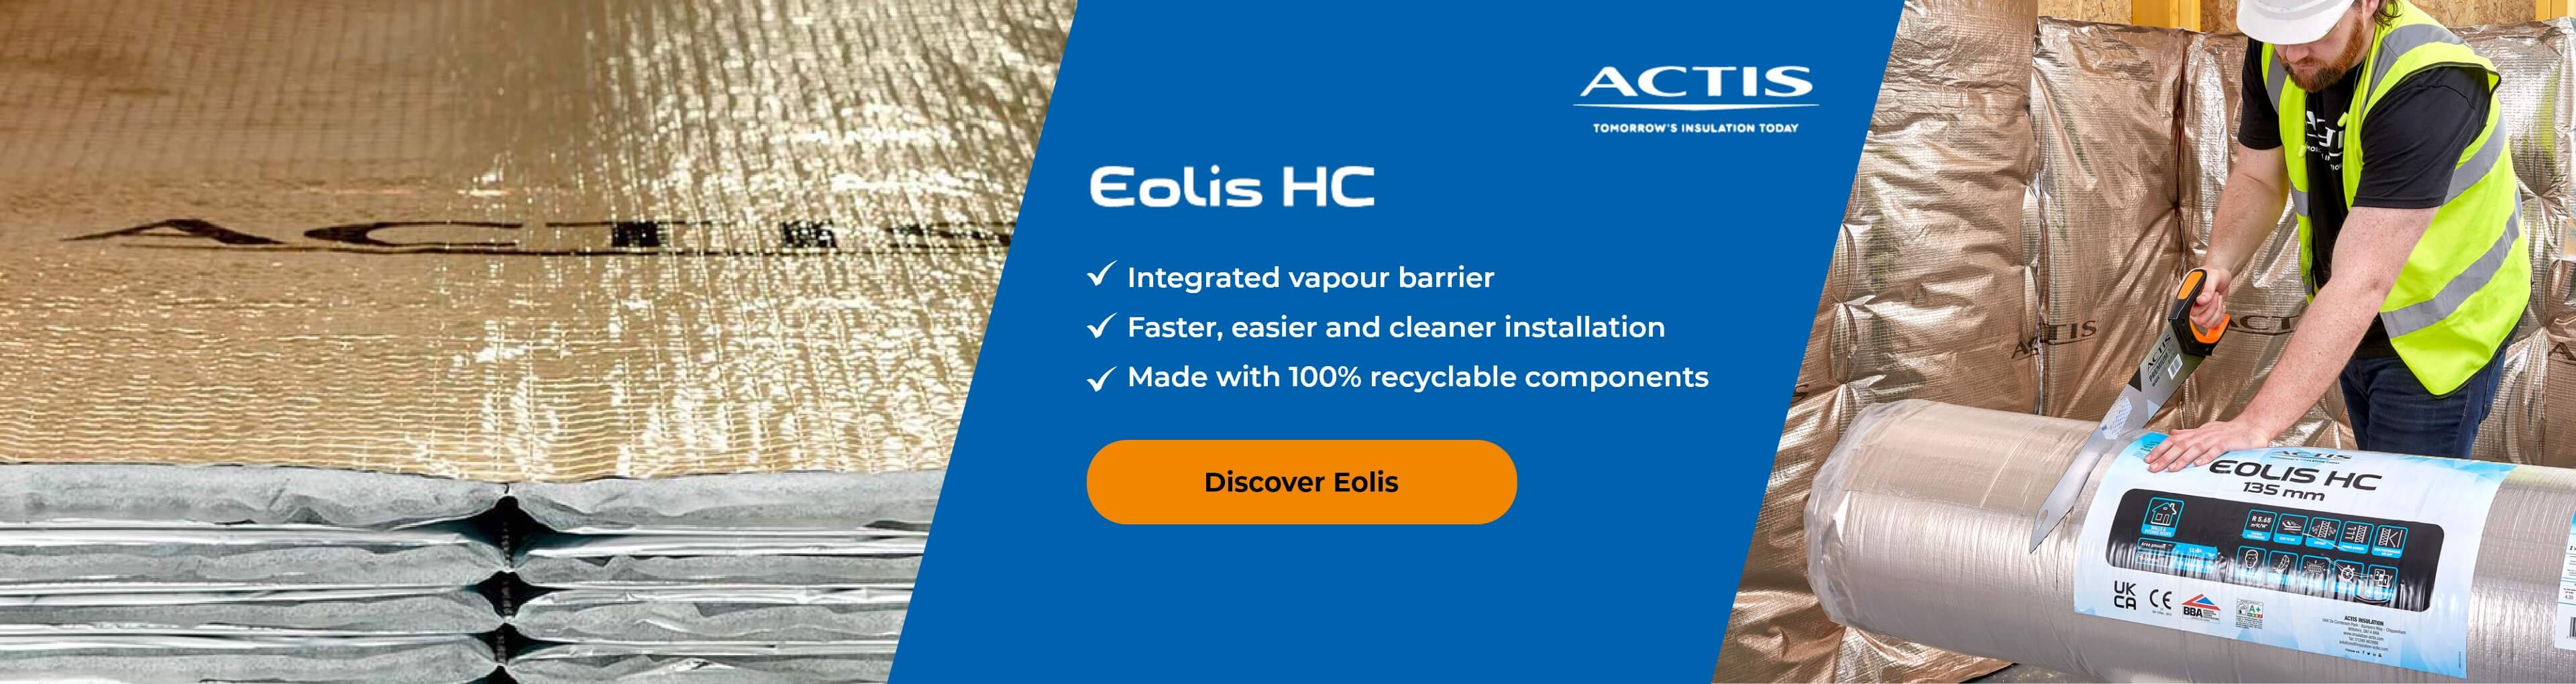 Discover Eolis from Actis